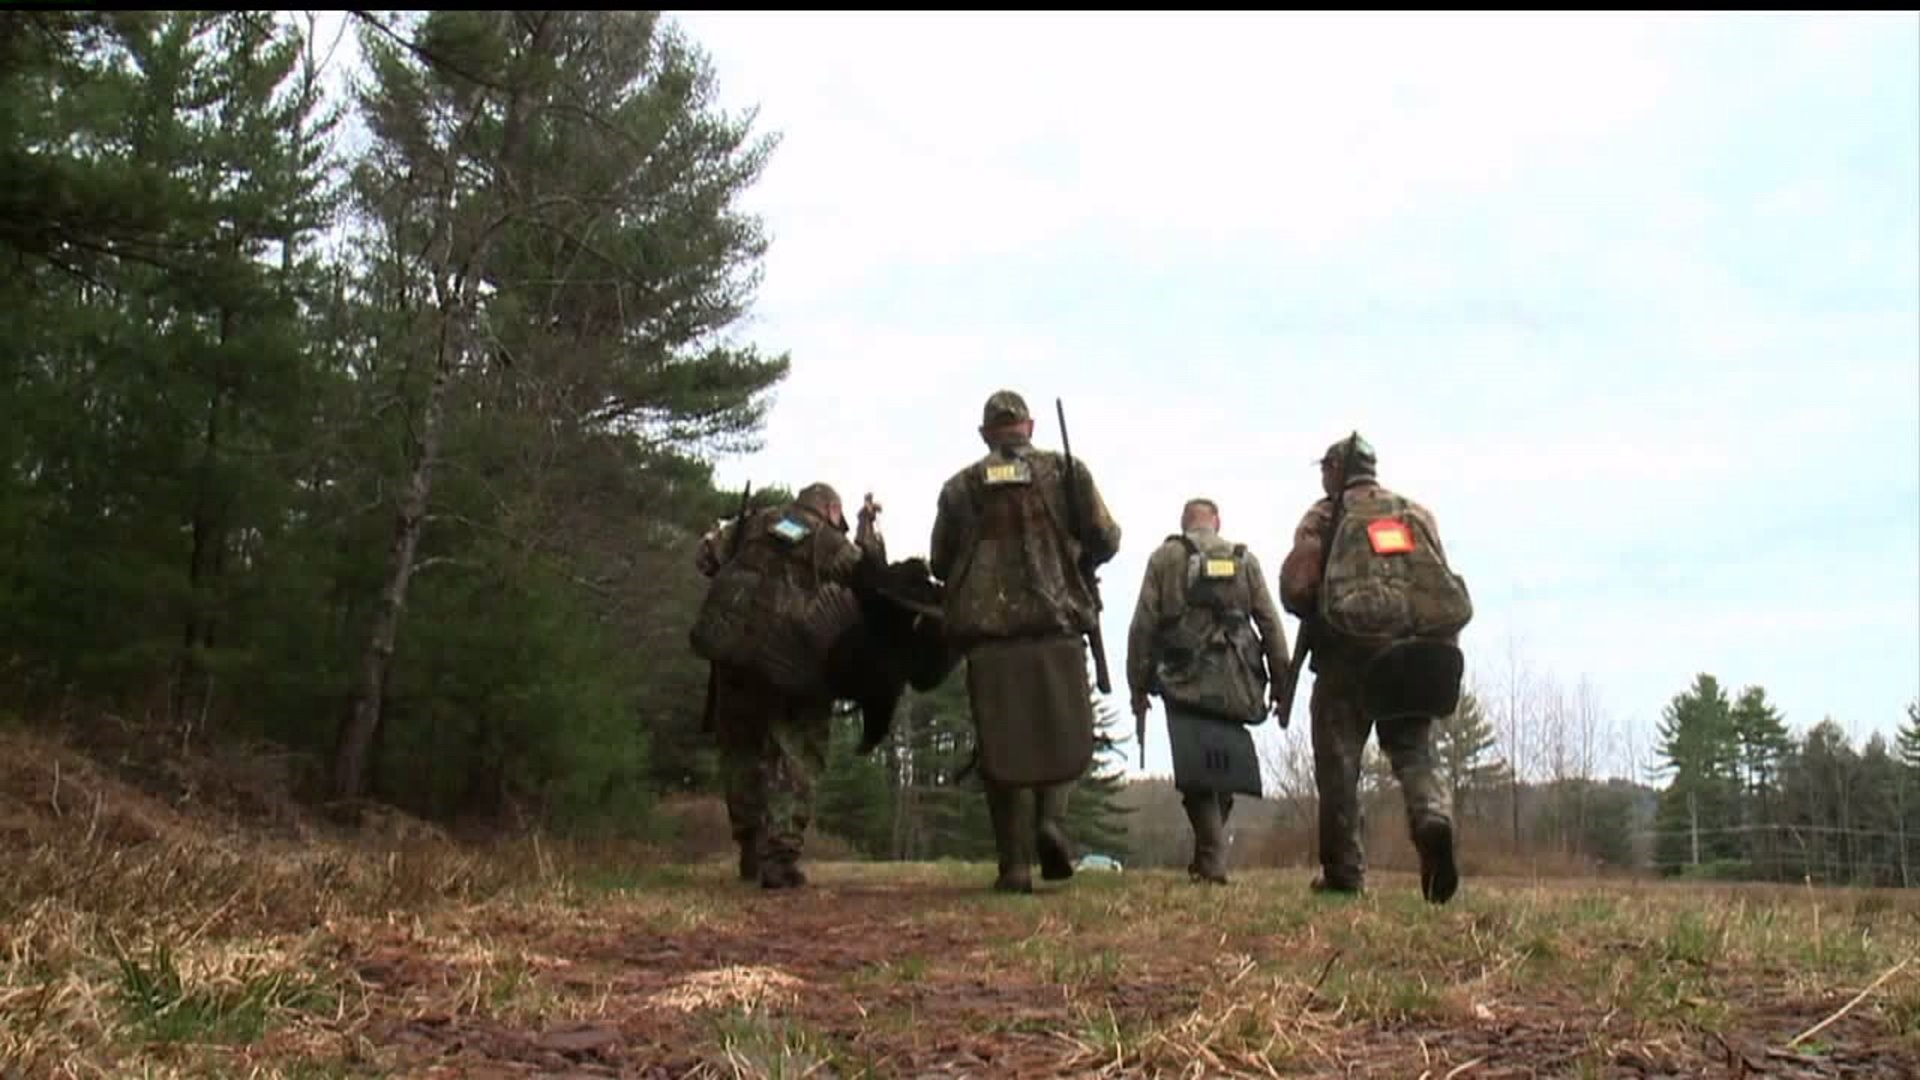 Pennsylvania law will make hunters watch out for purple